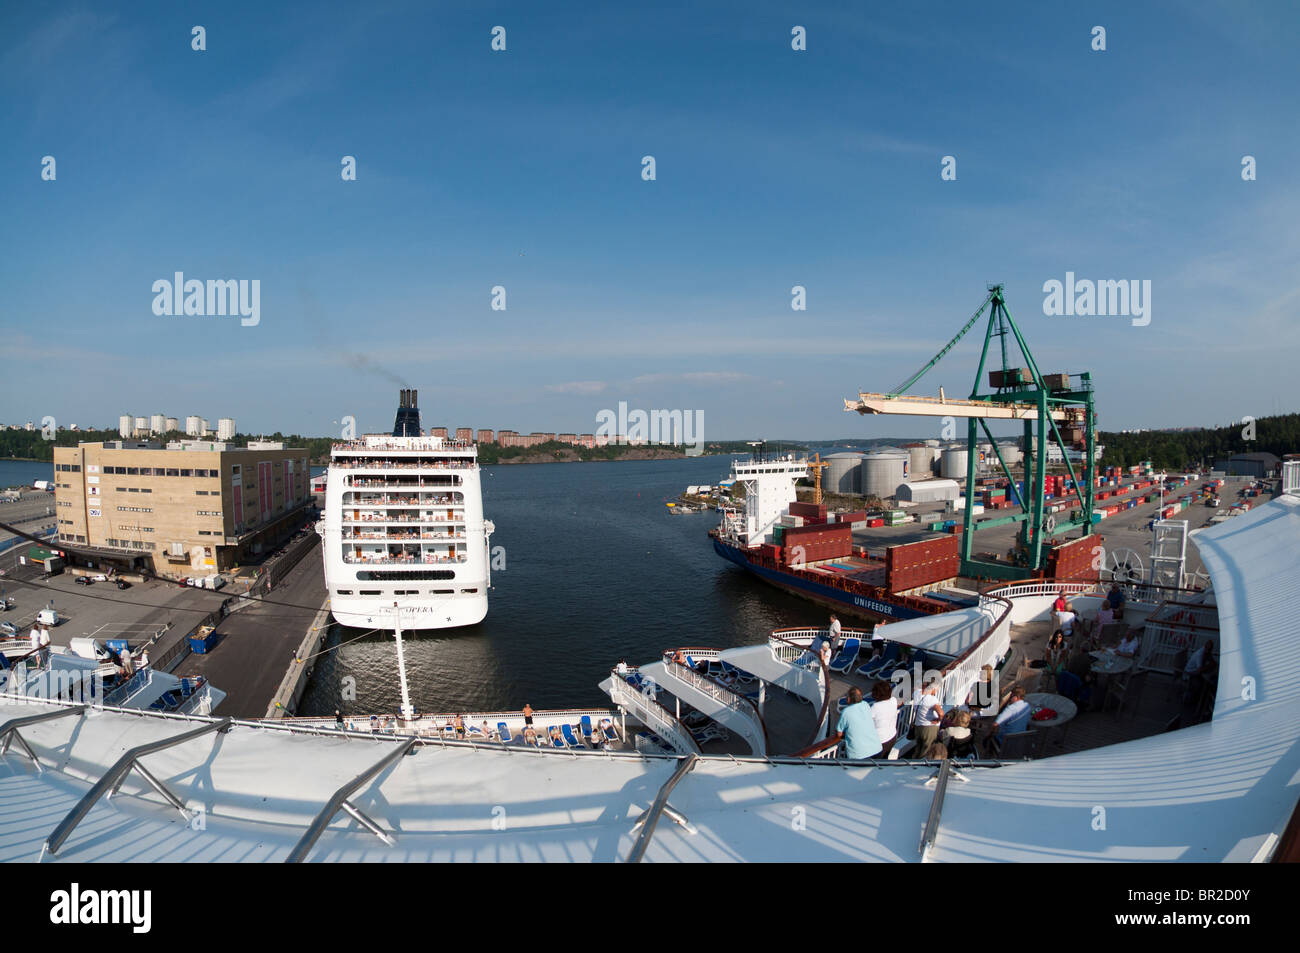 A fisheye photograph of the aft/stern of the P&O cruise ship 'Aurora', the MSC cruise ship 'Opera' and a container ship. Stock Photo